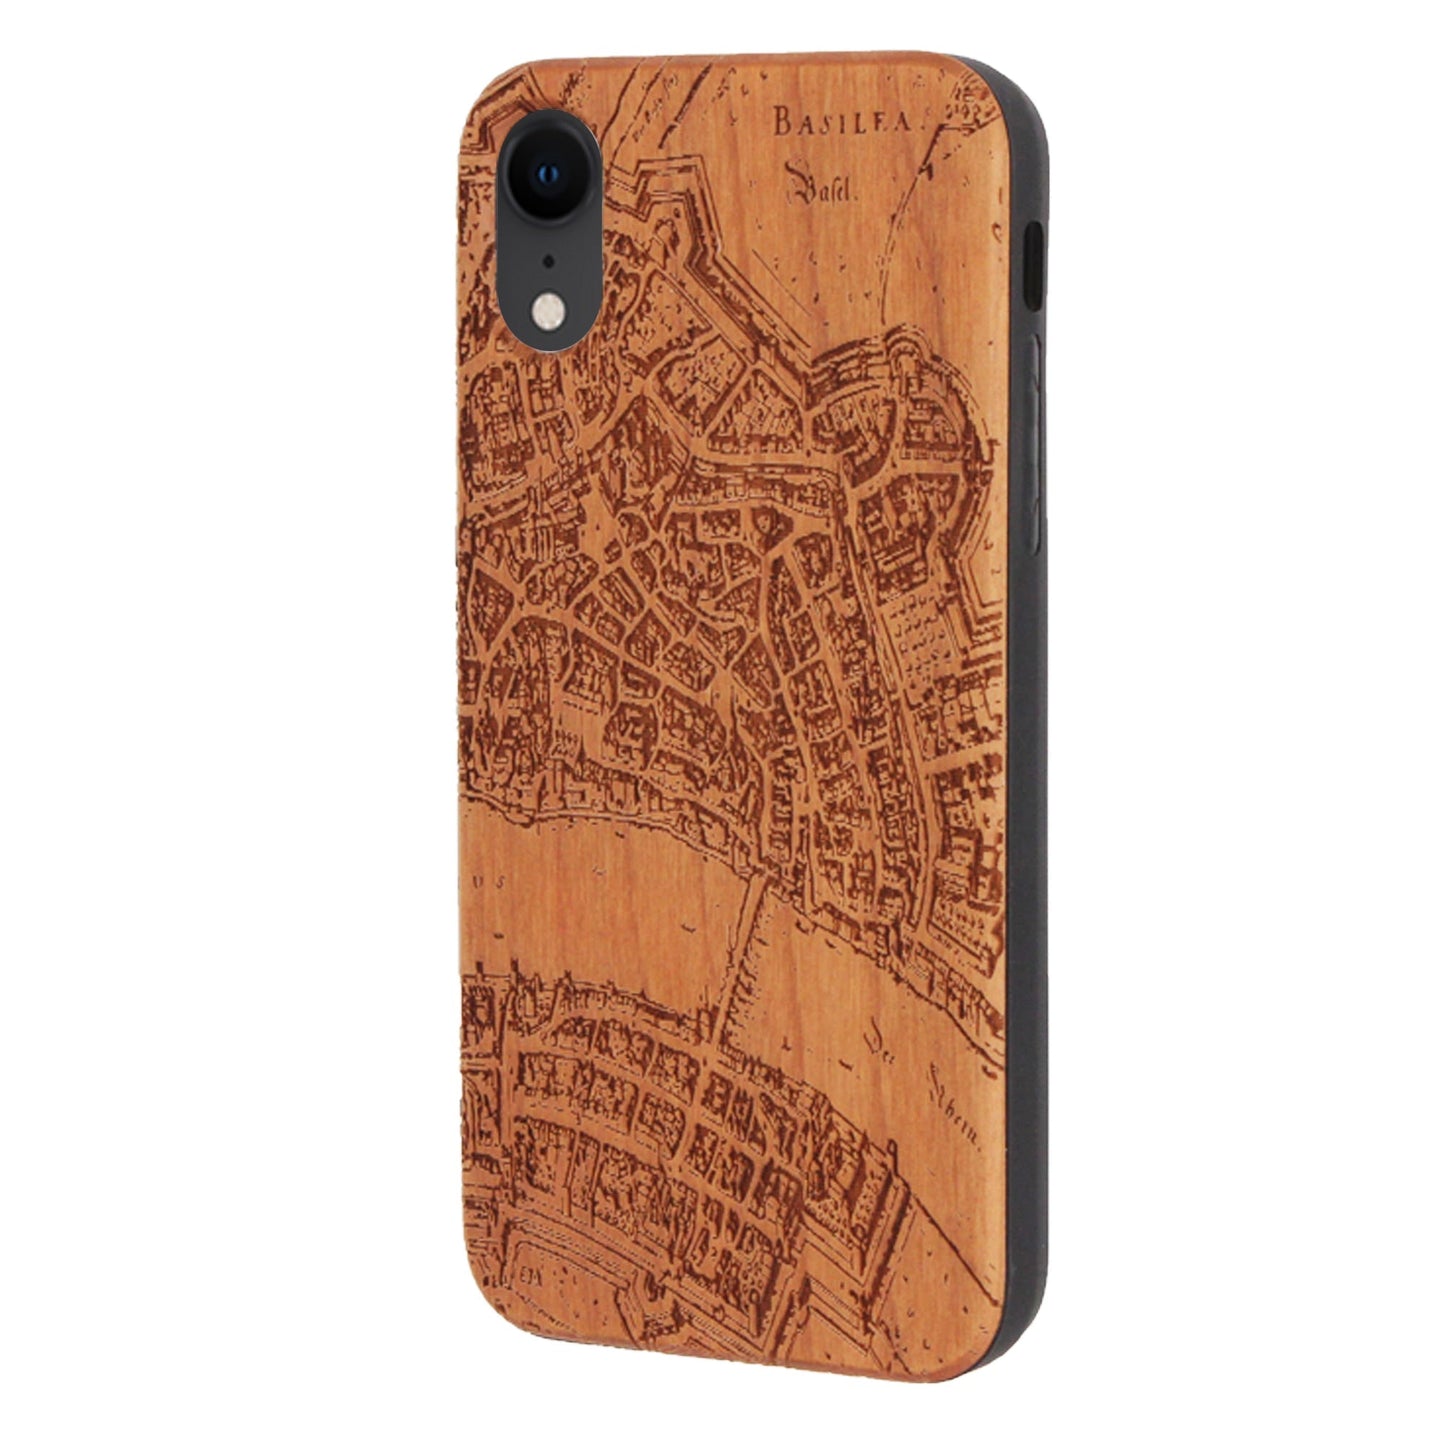 Basel Merian Eden case made of cherry wood for iPhone XR